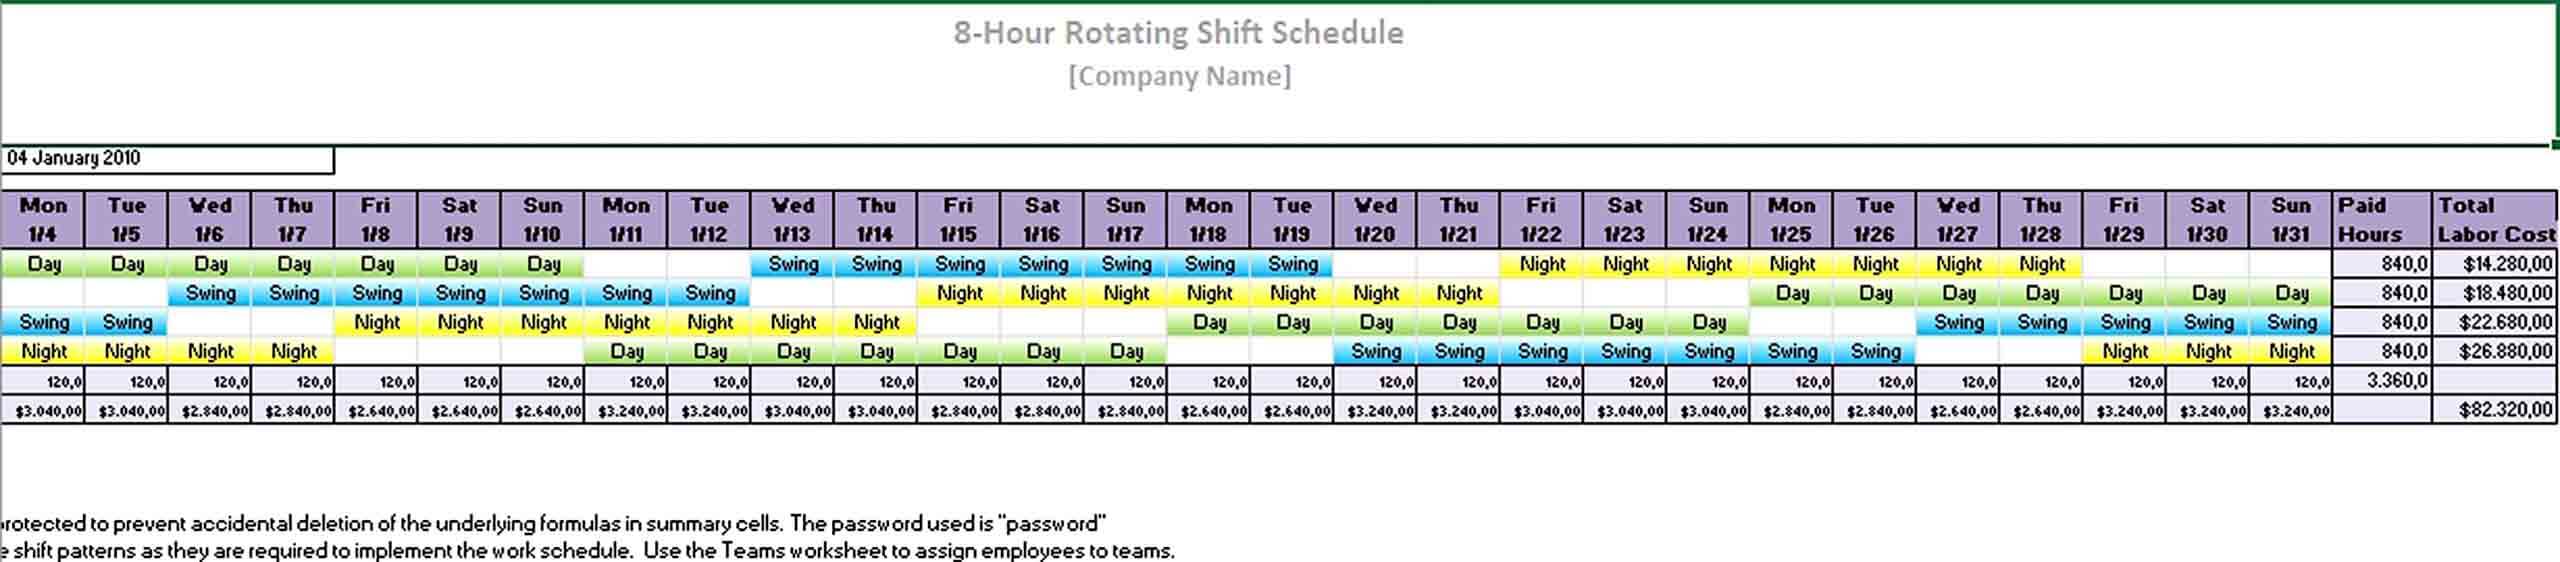 8 Hour rotating shift schedule1